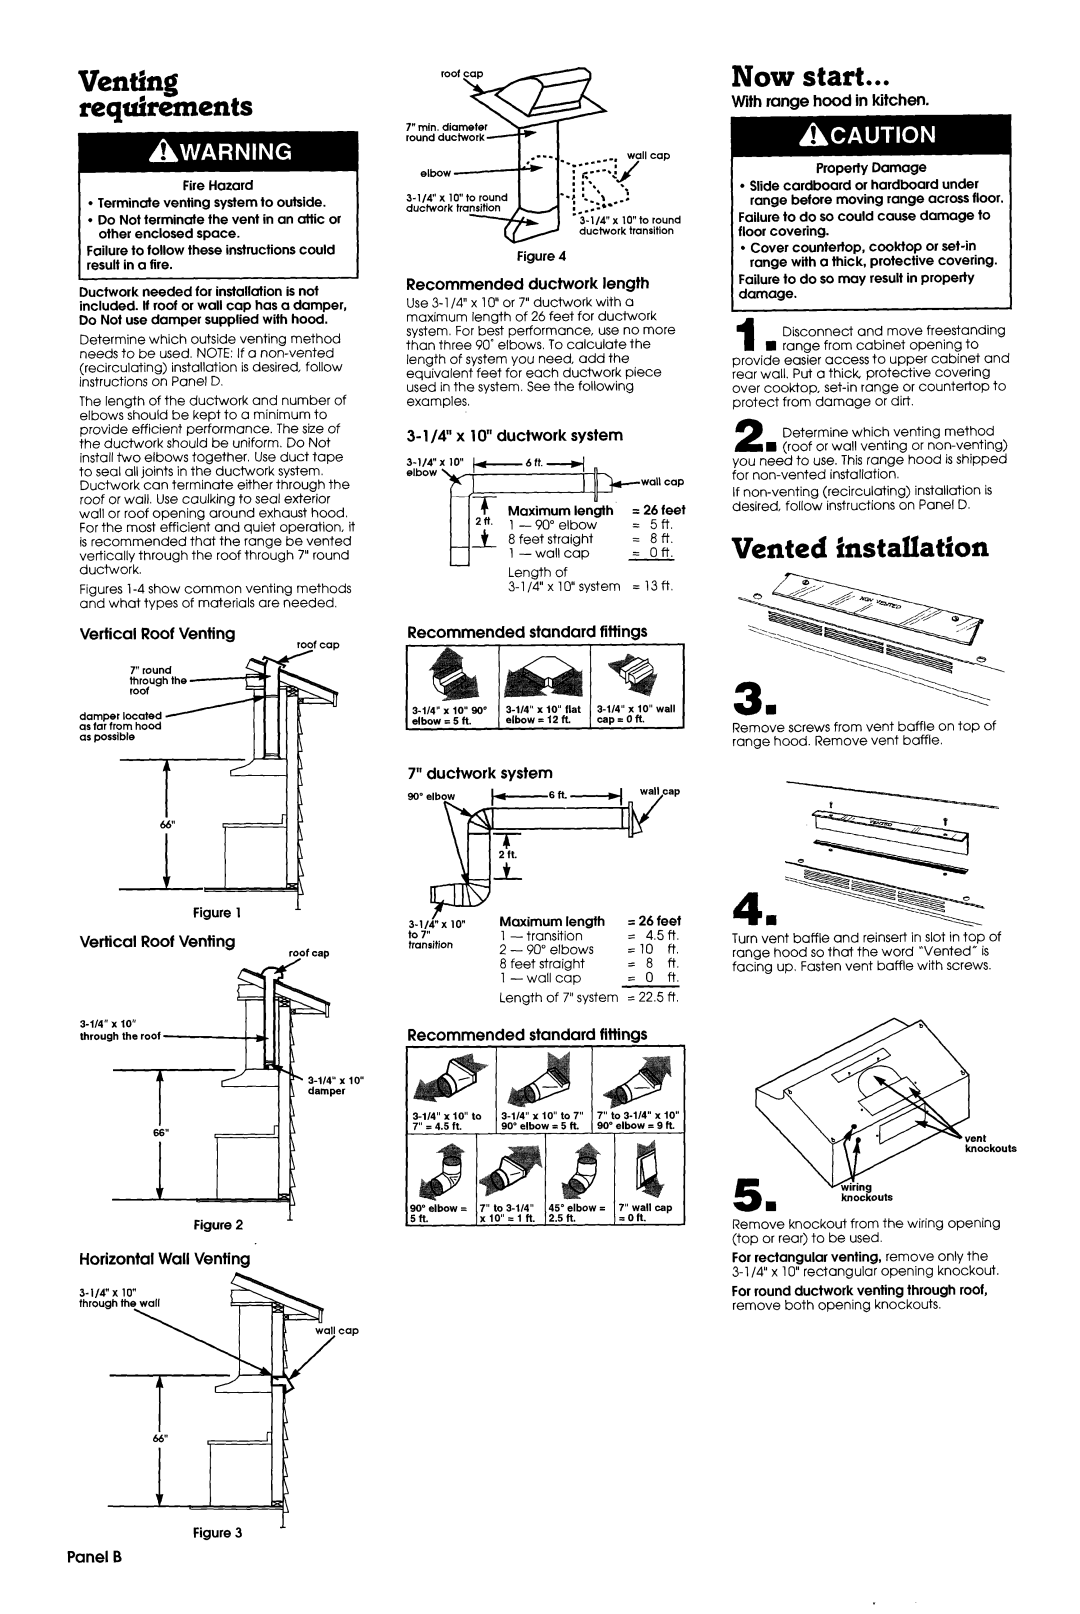 Whirlpool 35-718, 29-718 installation instructions Now start, Vented installation, Venting requirements 